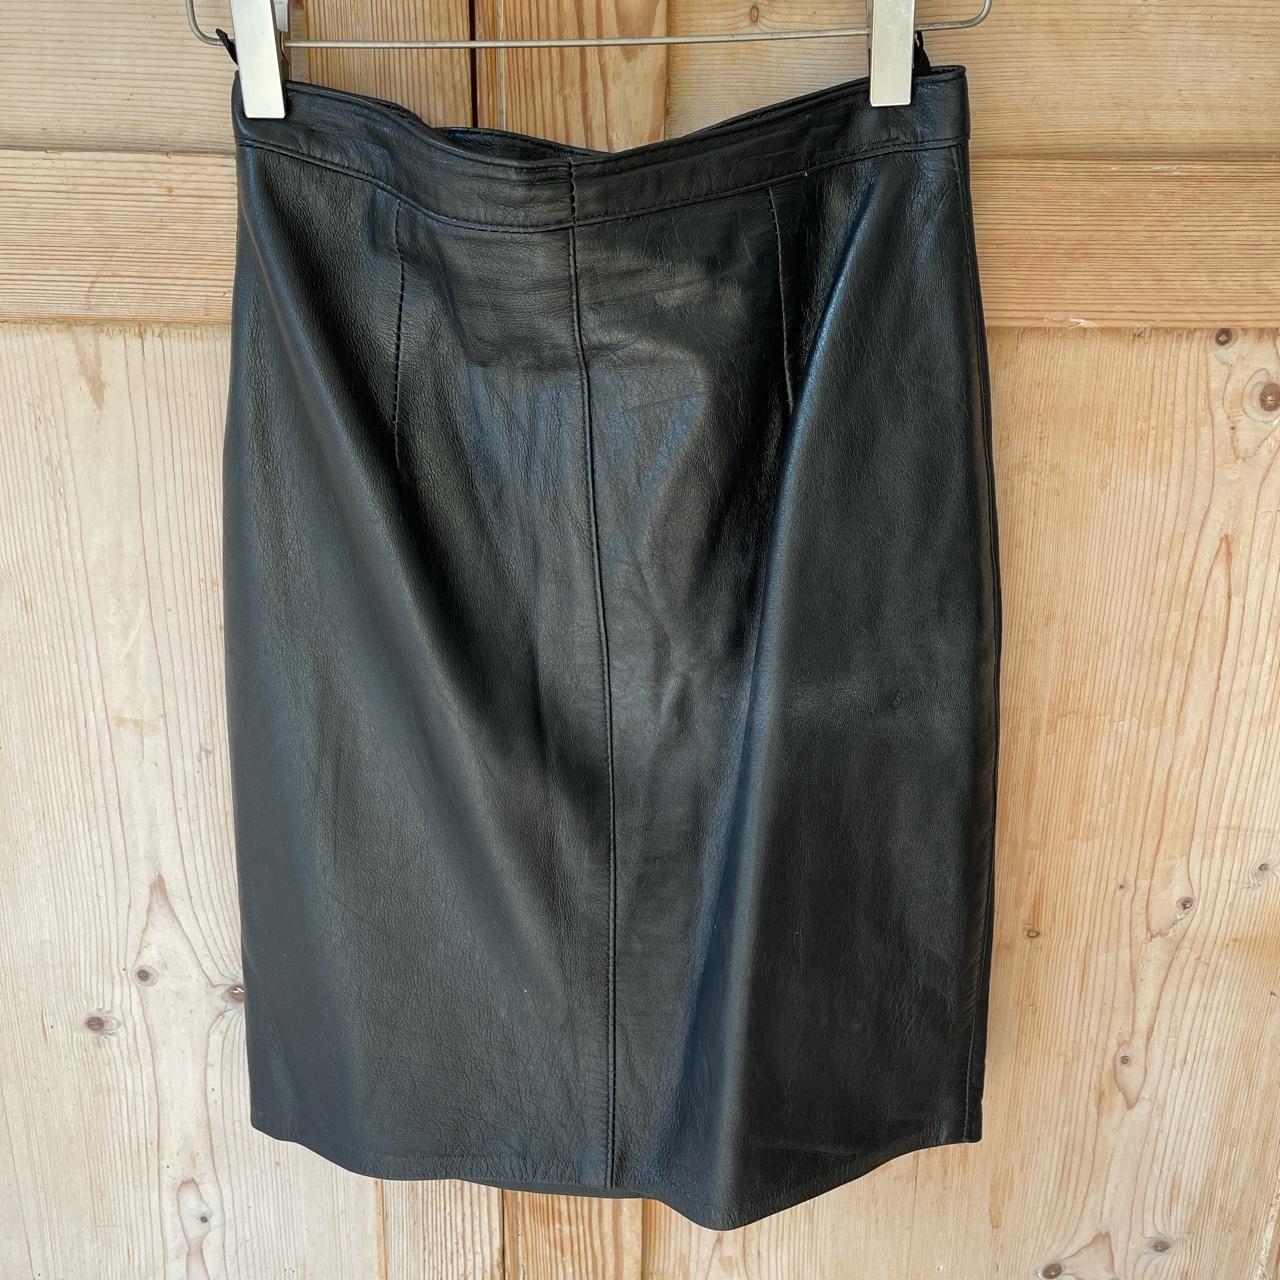 Vintage buttery leather skirt. Size 8. Let me know... - Depop